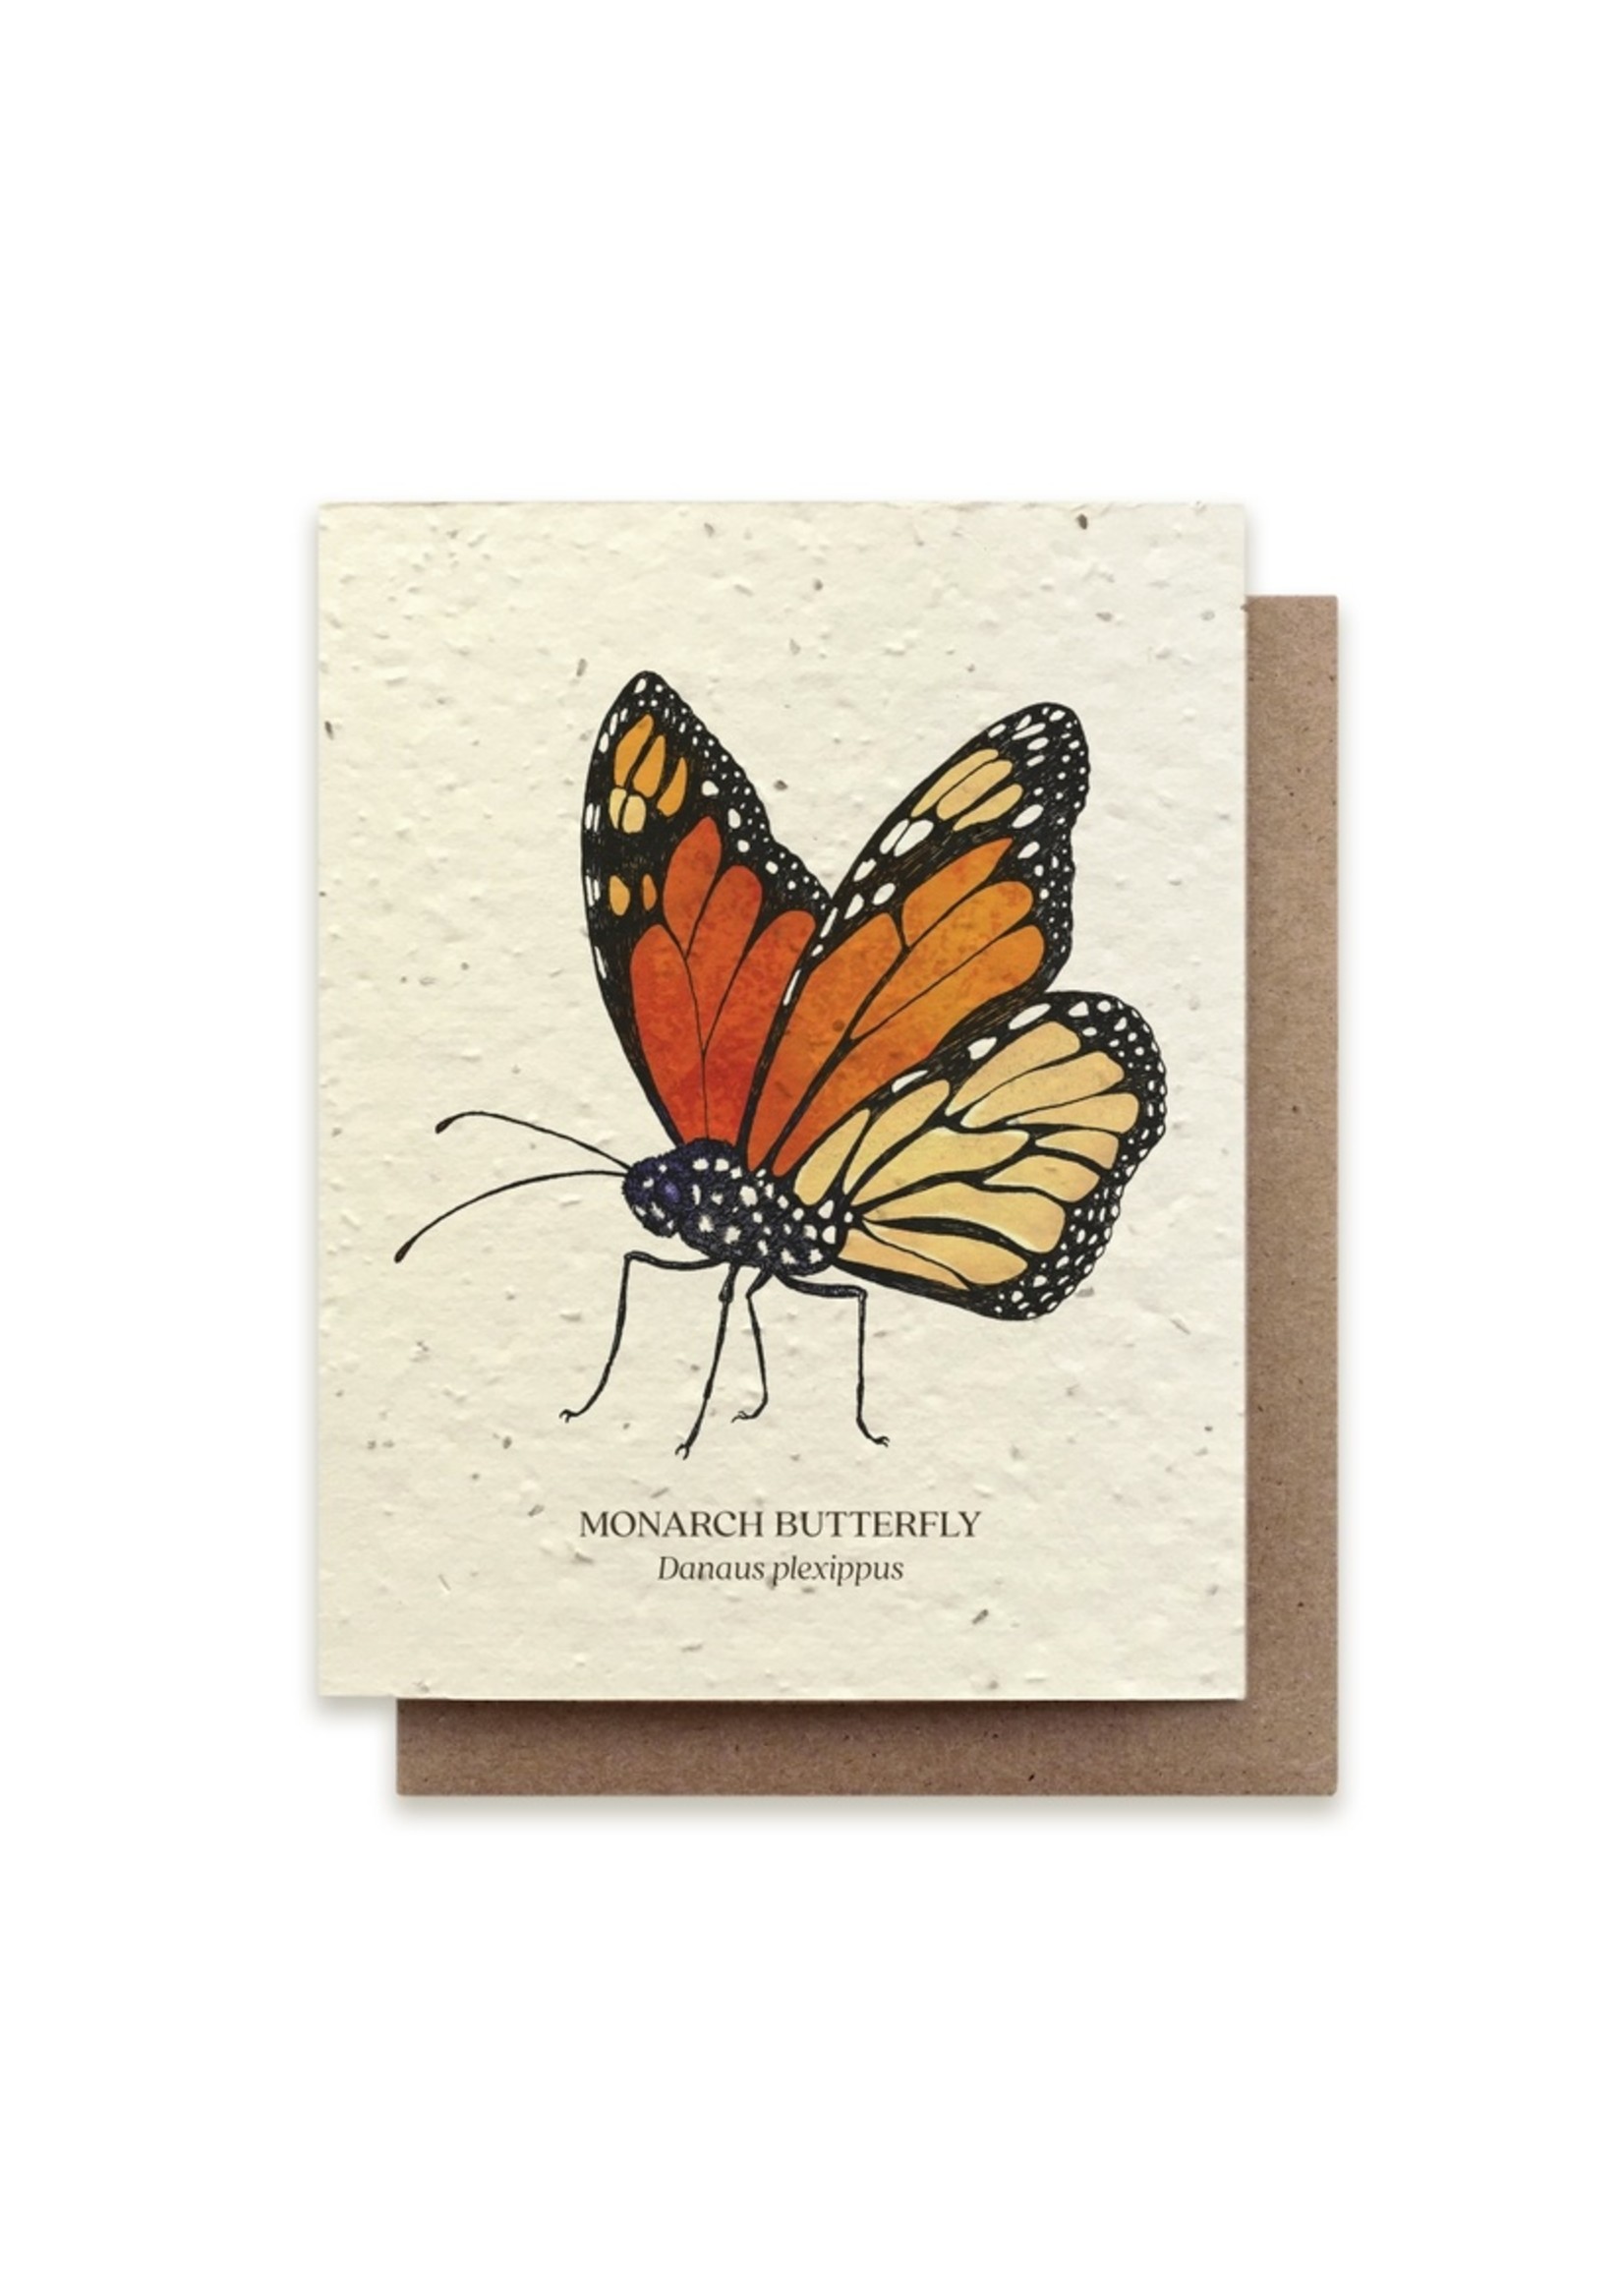 Small Victories The Bower Studio Seed Card Insects